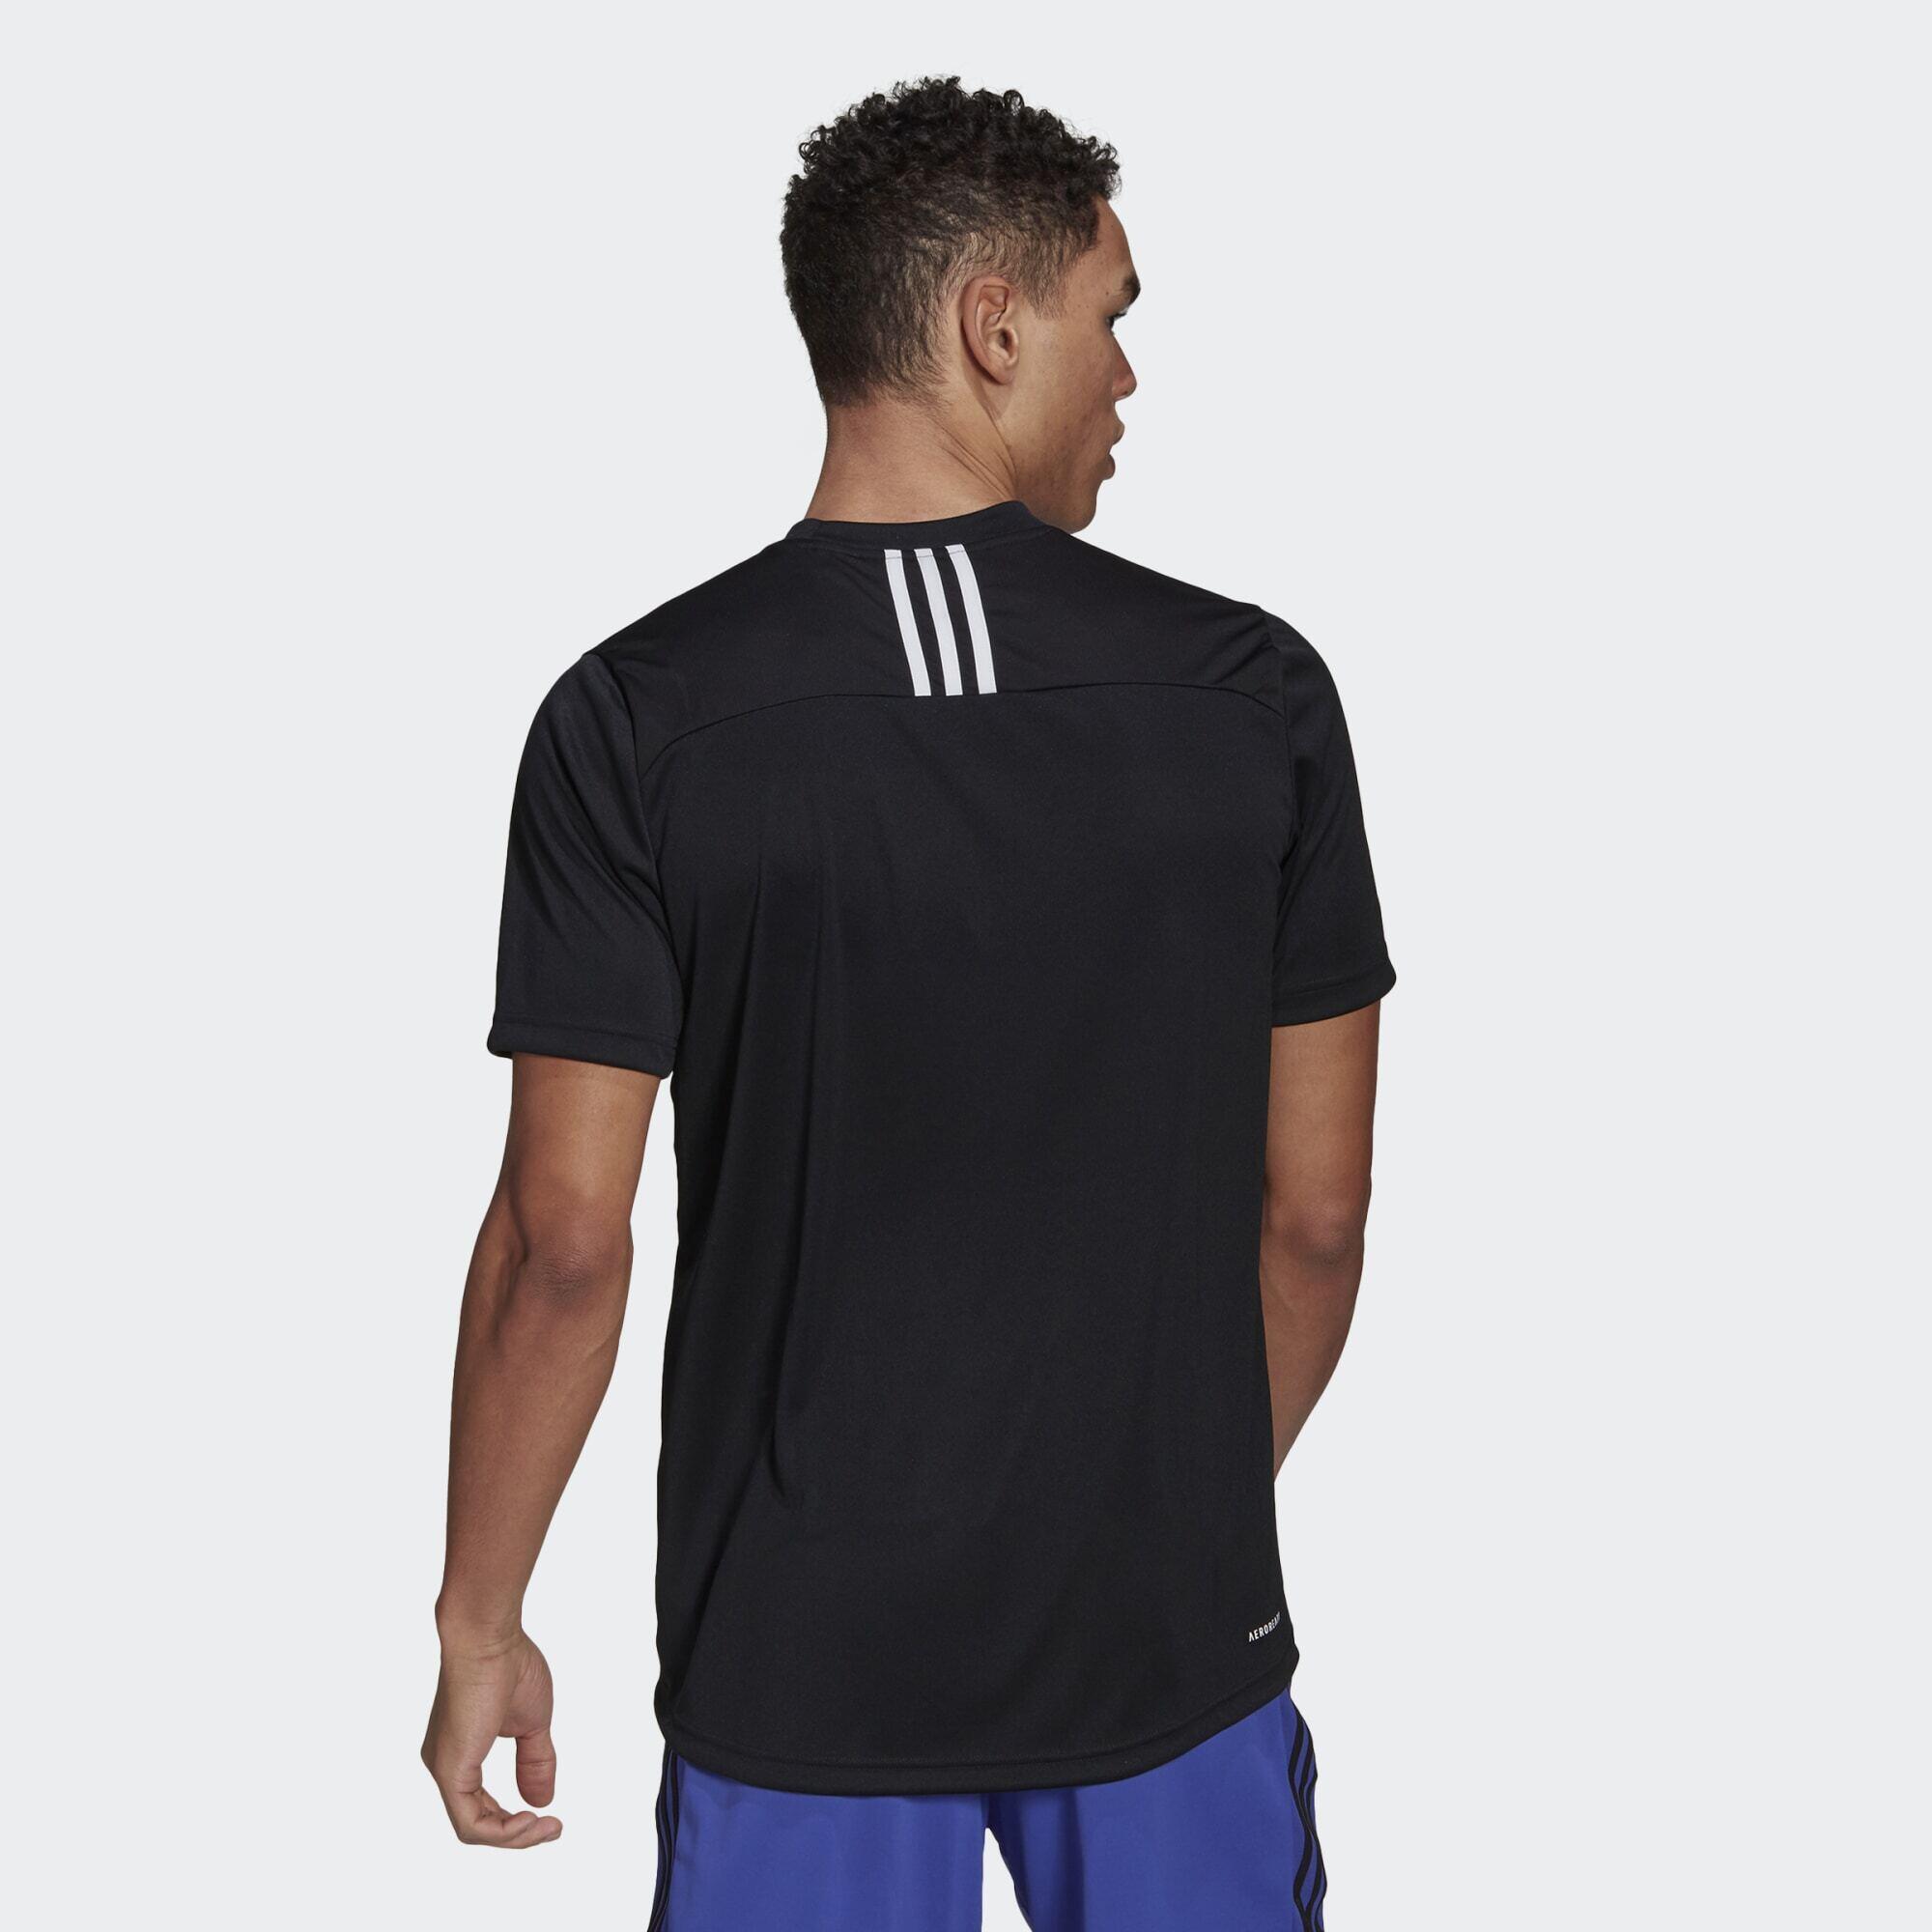 Designed to Move Sport 3-Stripes Tee 4/5